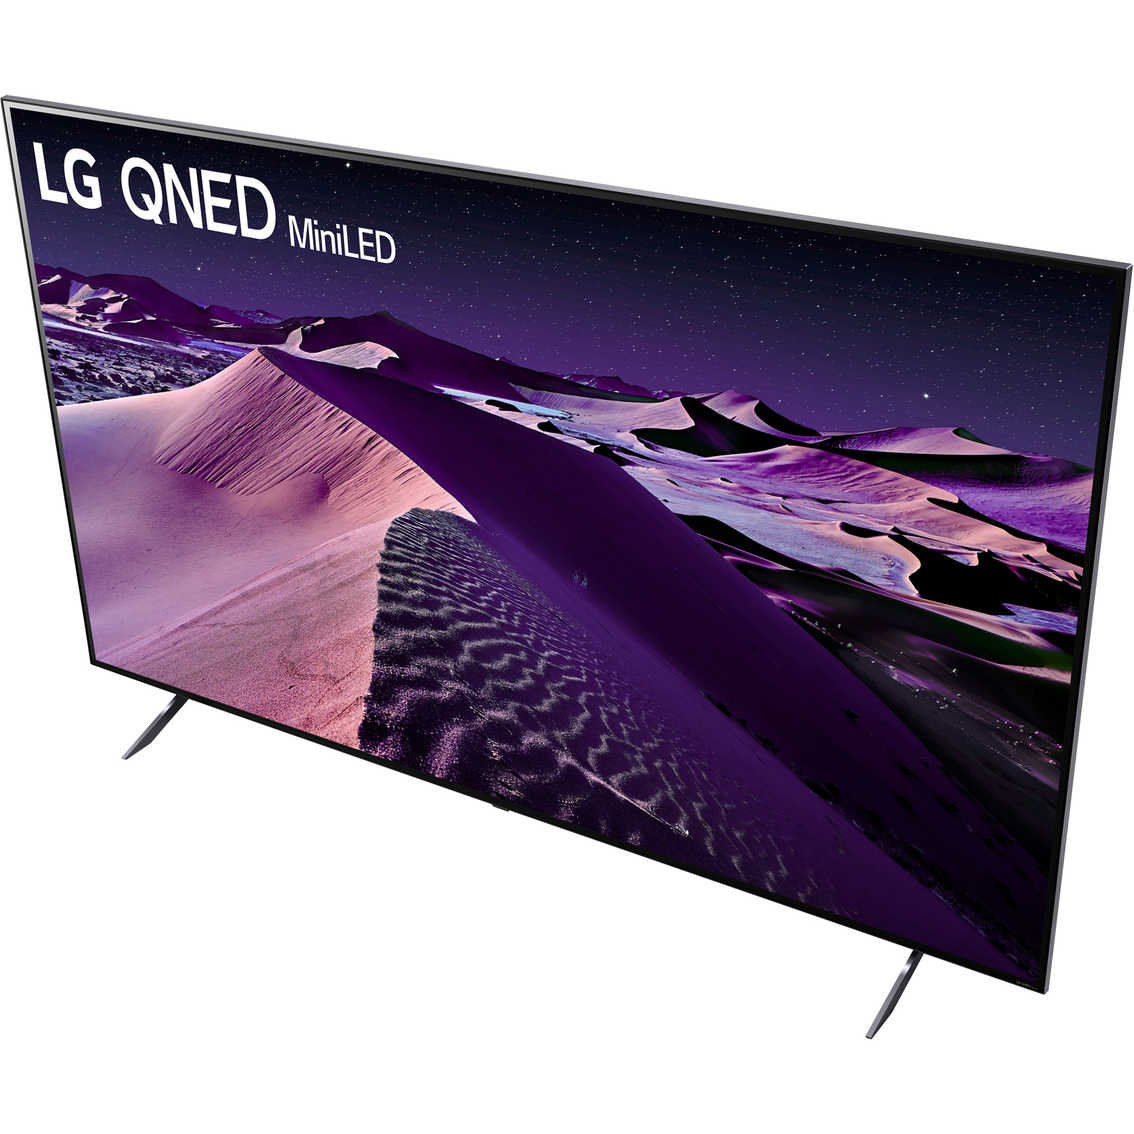 LG 86 in. QNED Mini-LED 120Hz 4K HDR Smart TV with AI ThinQ 86QNED85UQA - Image 6 of 10